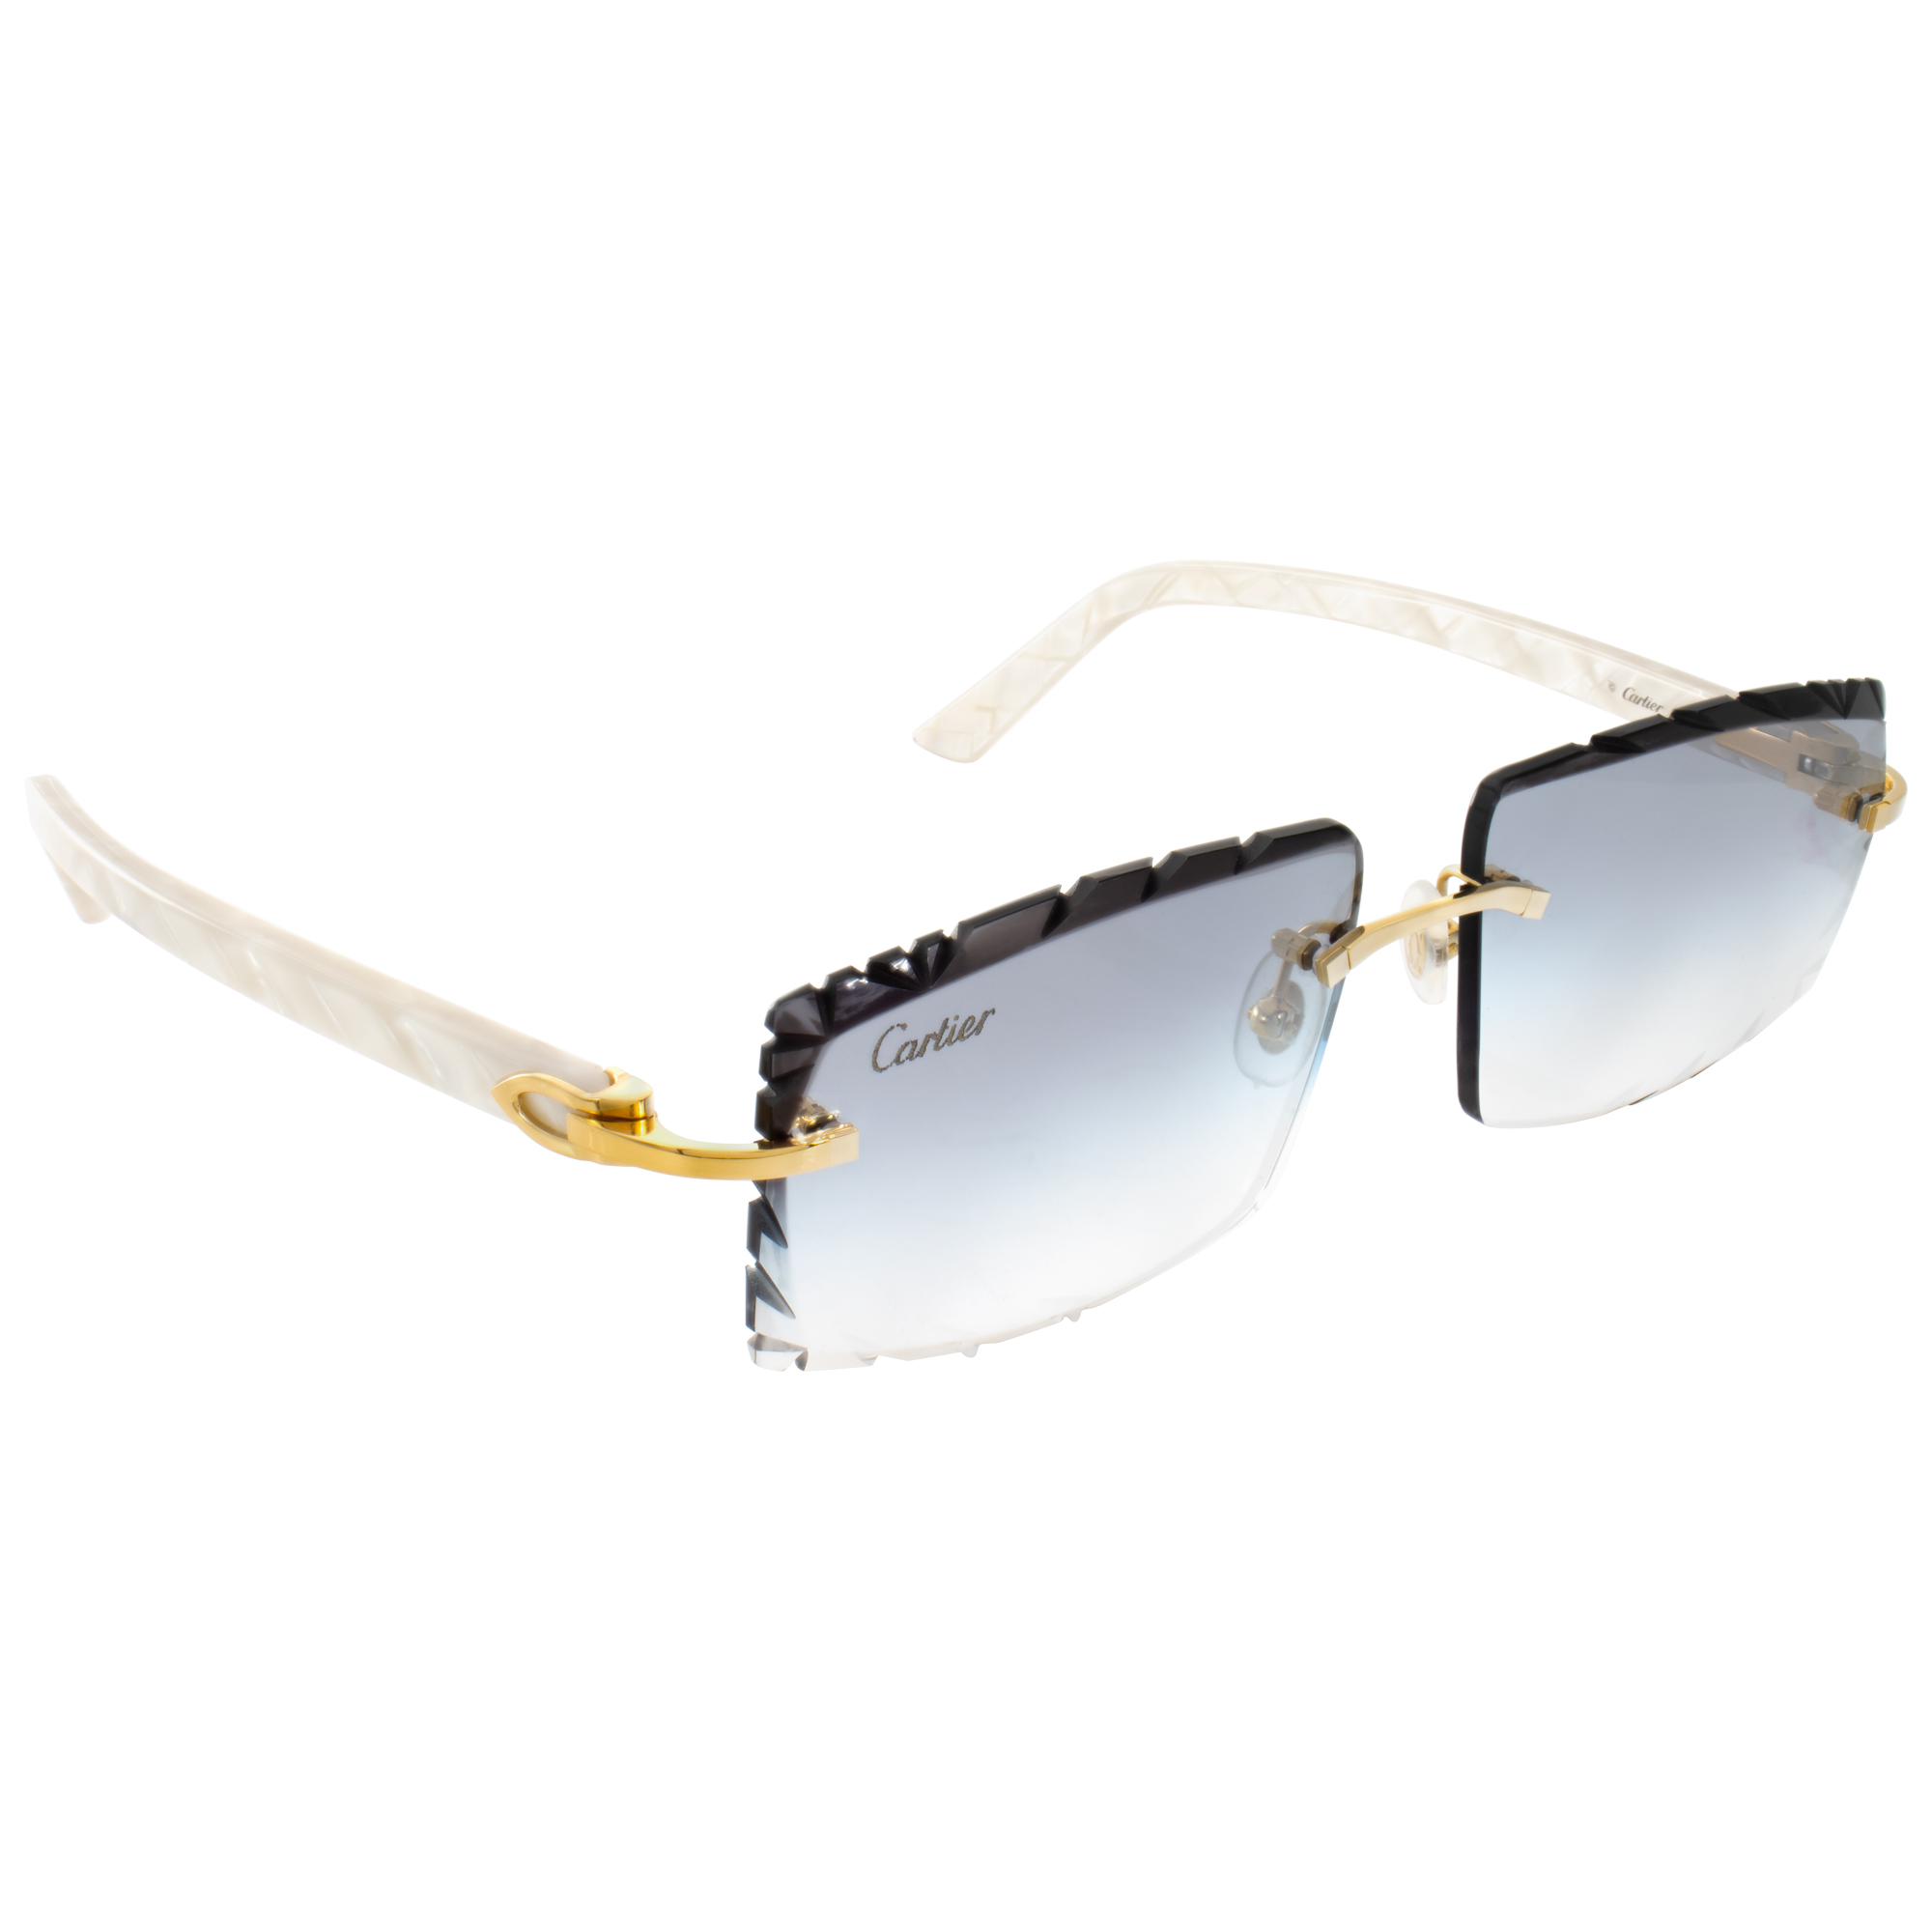 Cartier Pearl White Rimless Eyeglasses converted into sunglasses with beveled blue lens image 3